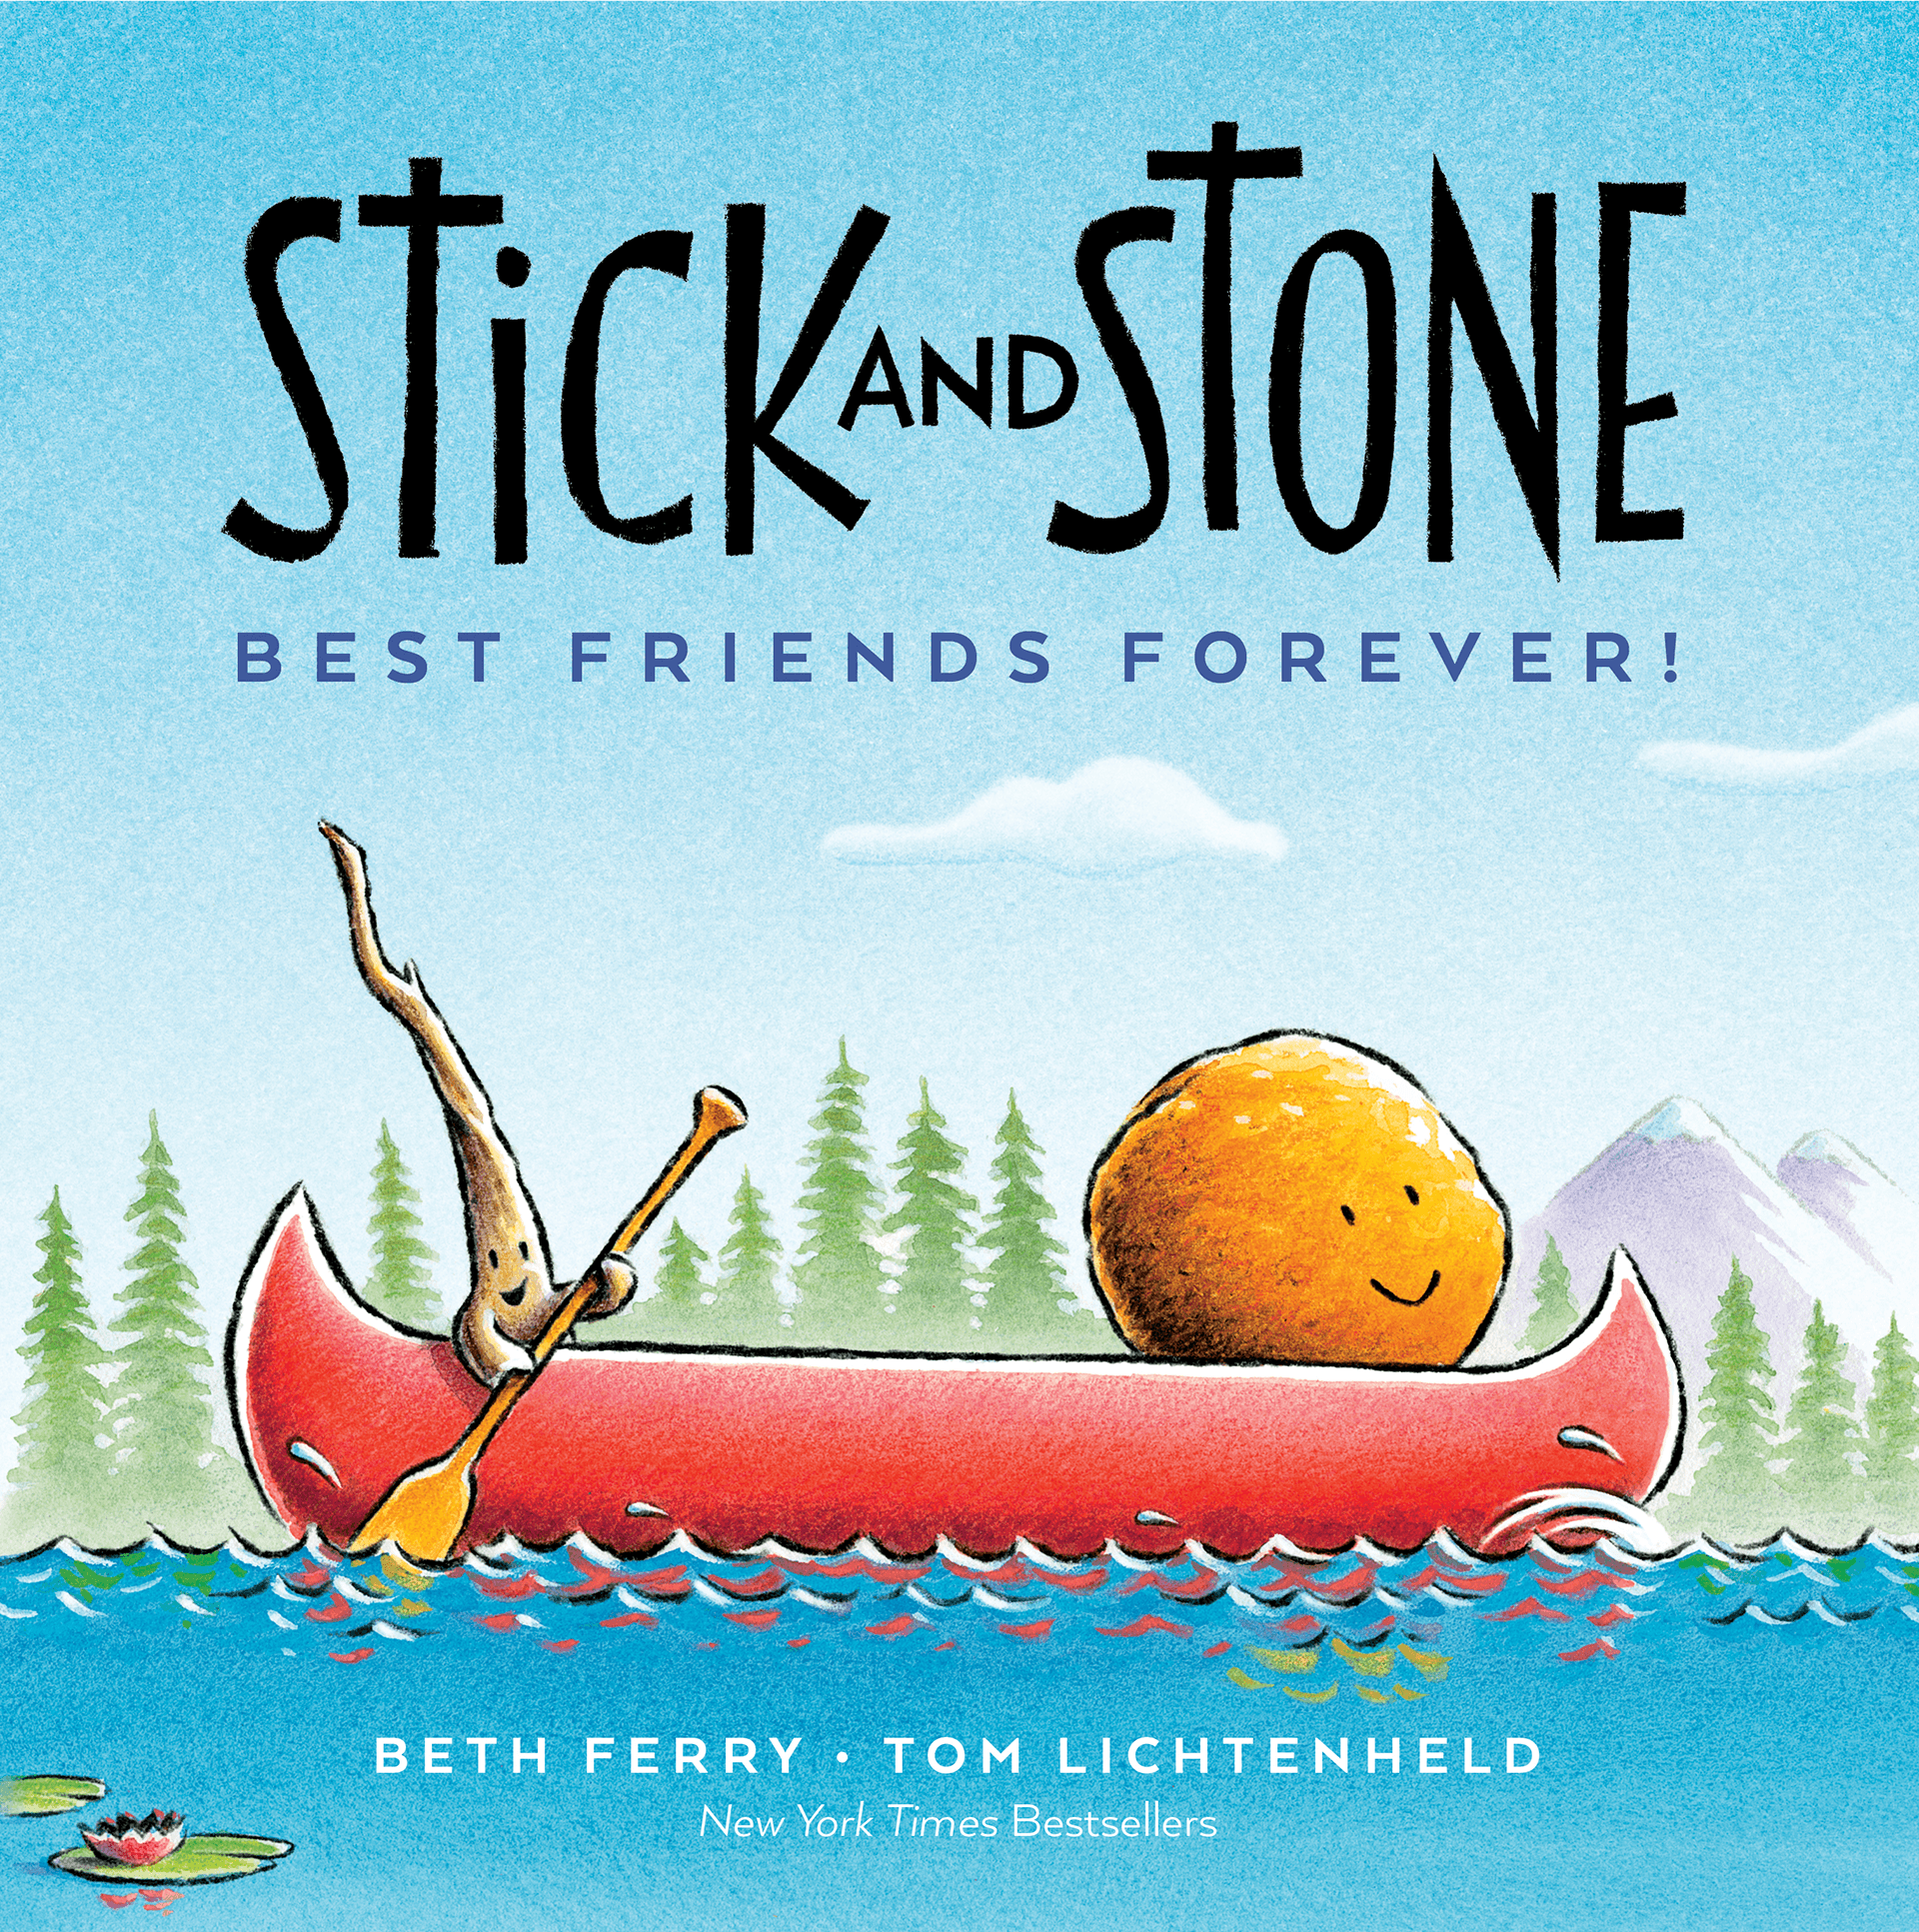 Stick And Stone: Best Friends Forever!